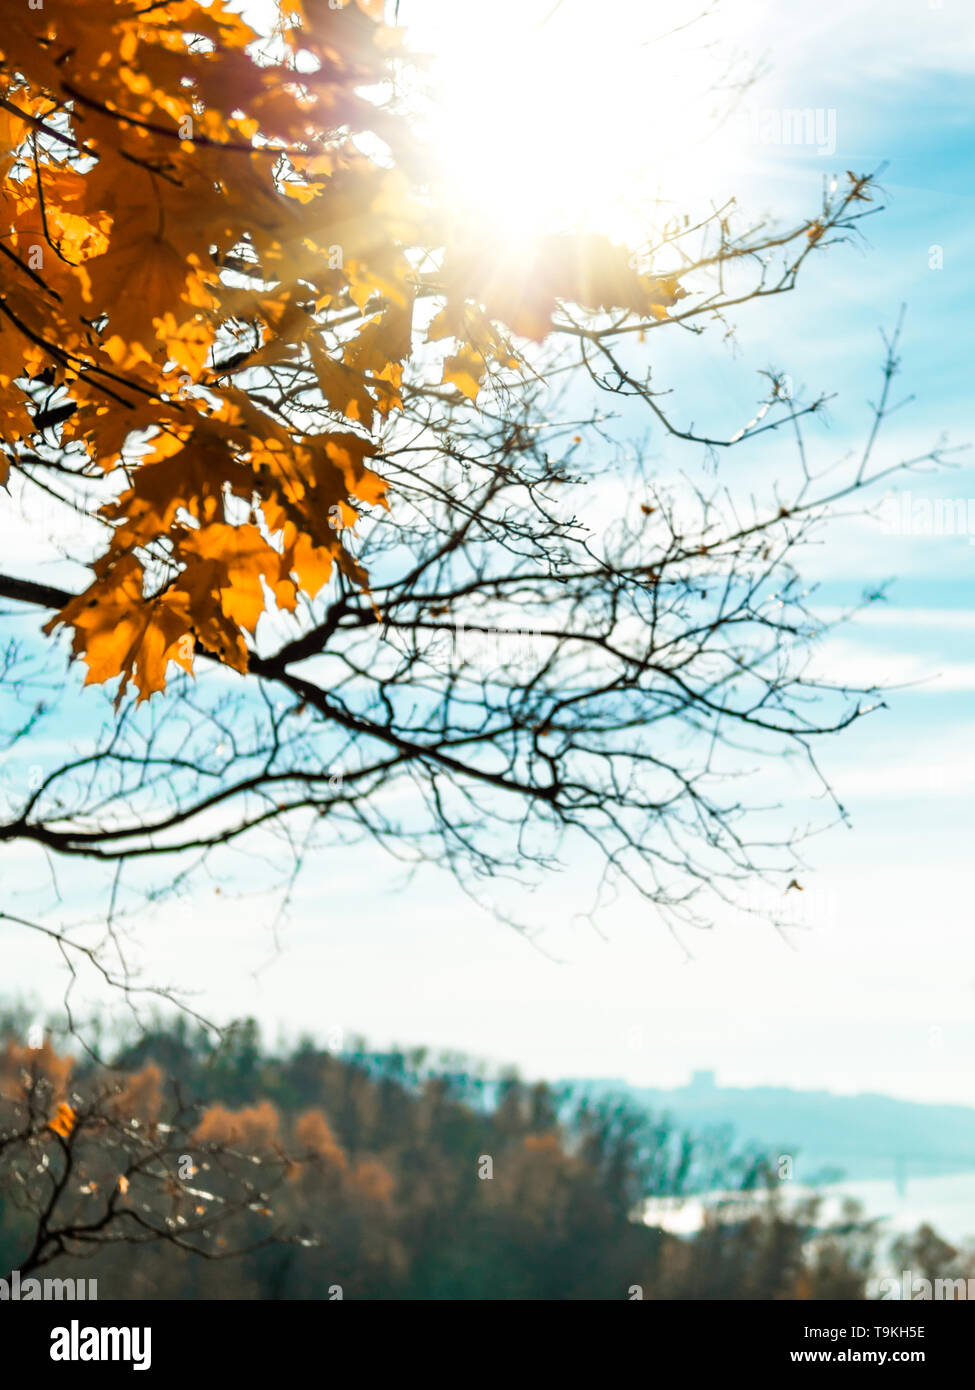 Autumn park. Beautiful yellow maple leaves on branch and sunlight. Beautiful autumn natural background. Falling foliage with sun flares, fall trail landscape. Copy space for text. Vertical. Stock Photo